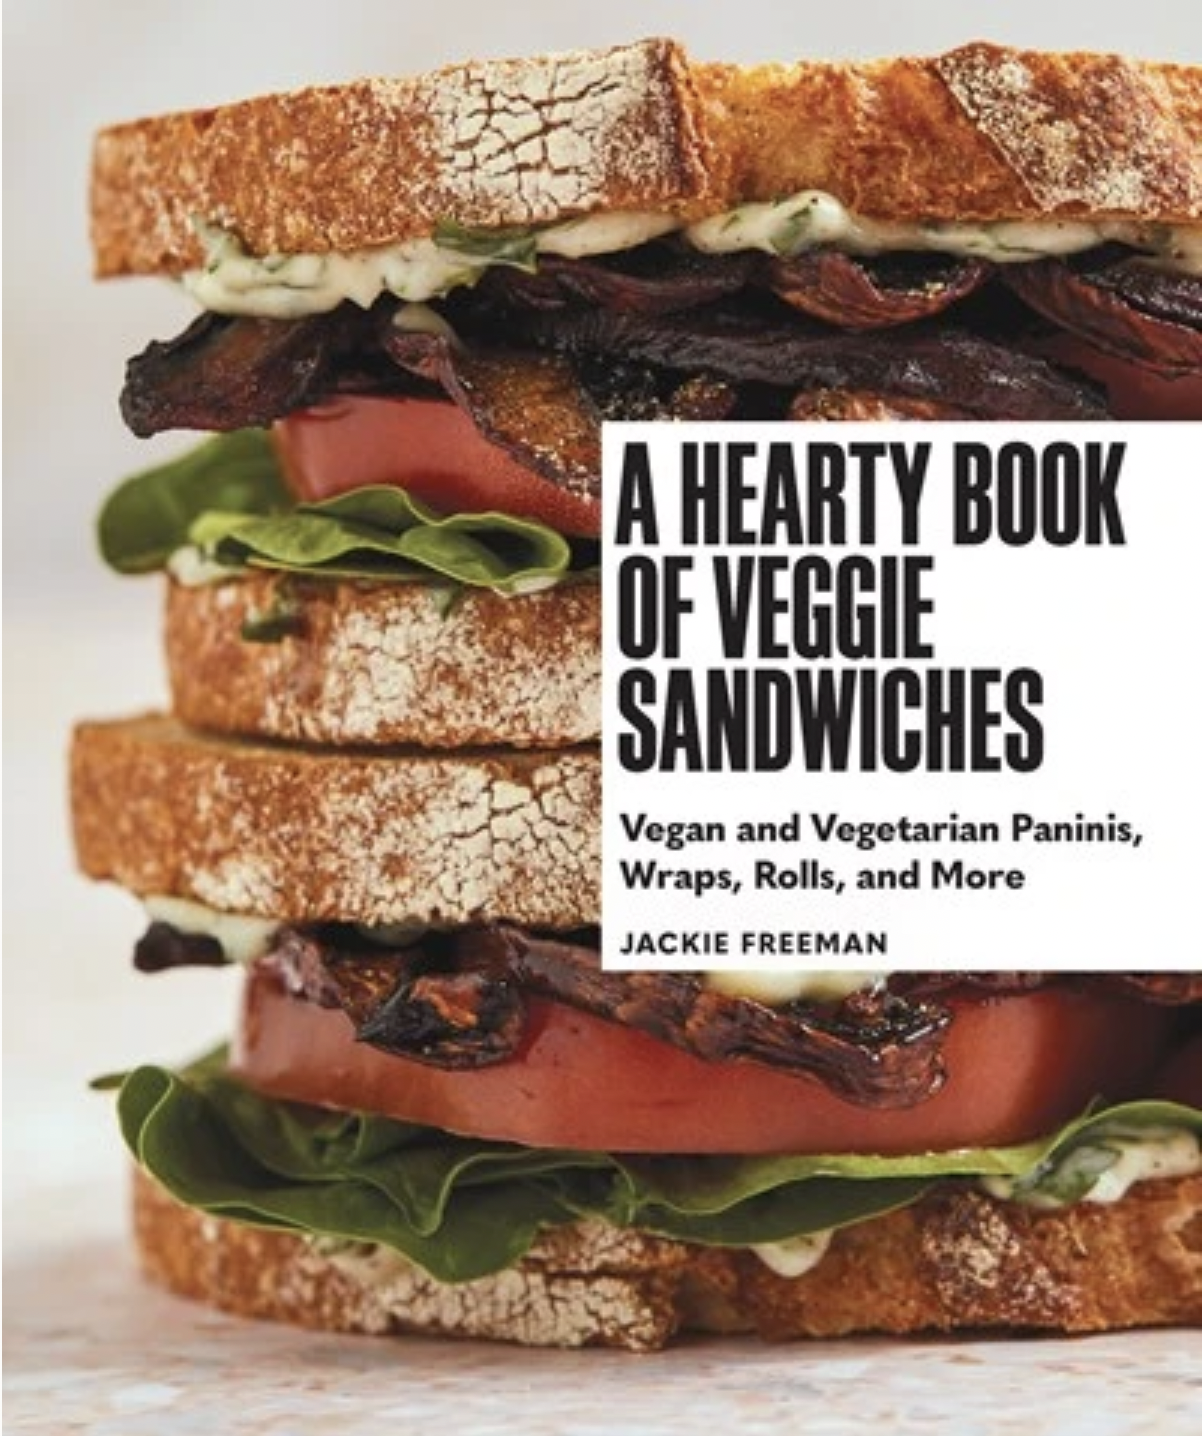 Charity Burggraaf | Cookbook Photographer | Seattle | Bellingham | Vancouver BC | A Hearty Book of Veggie Sandwiches | Jackie Freeman